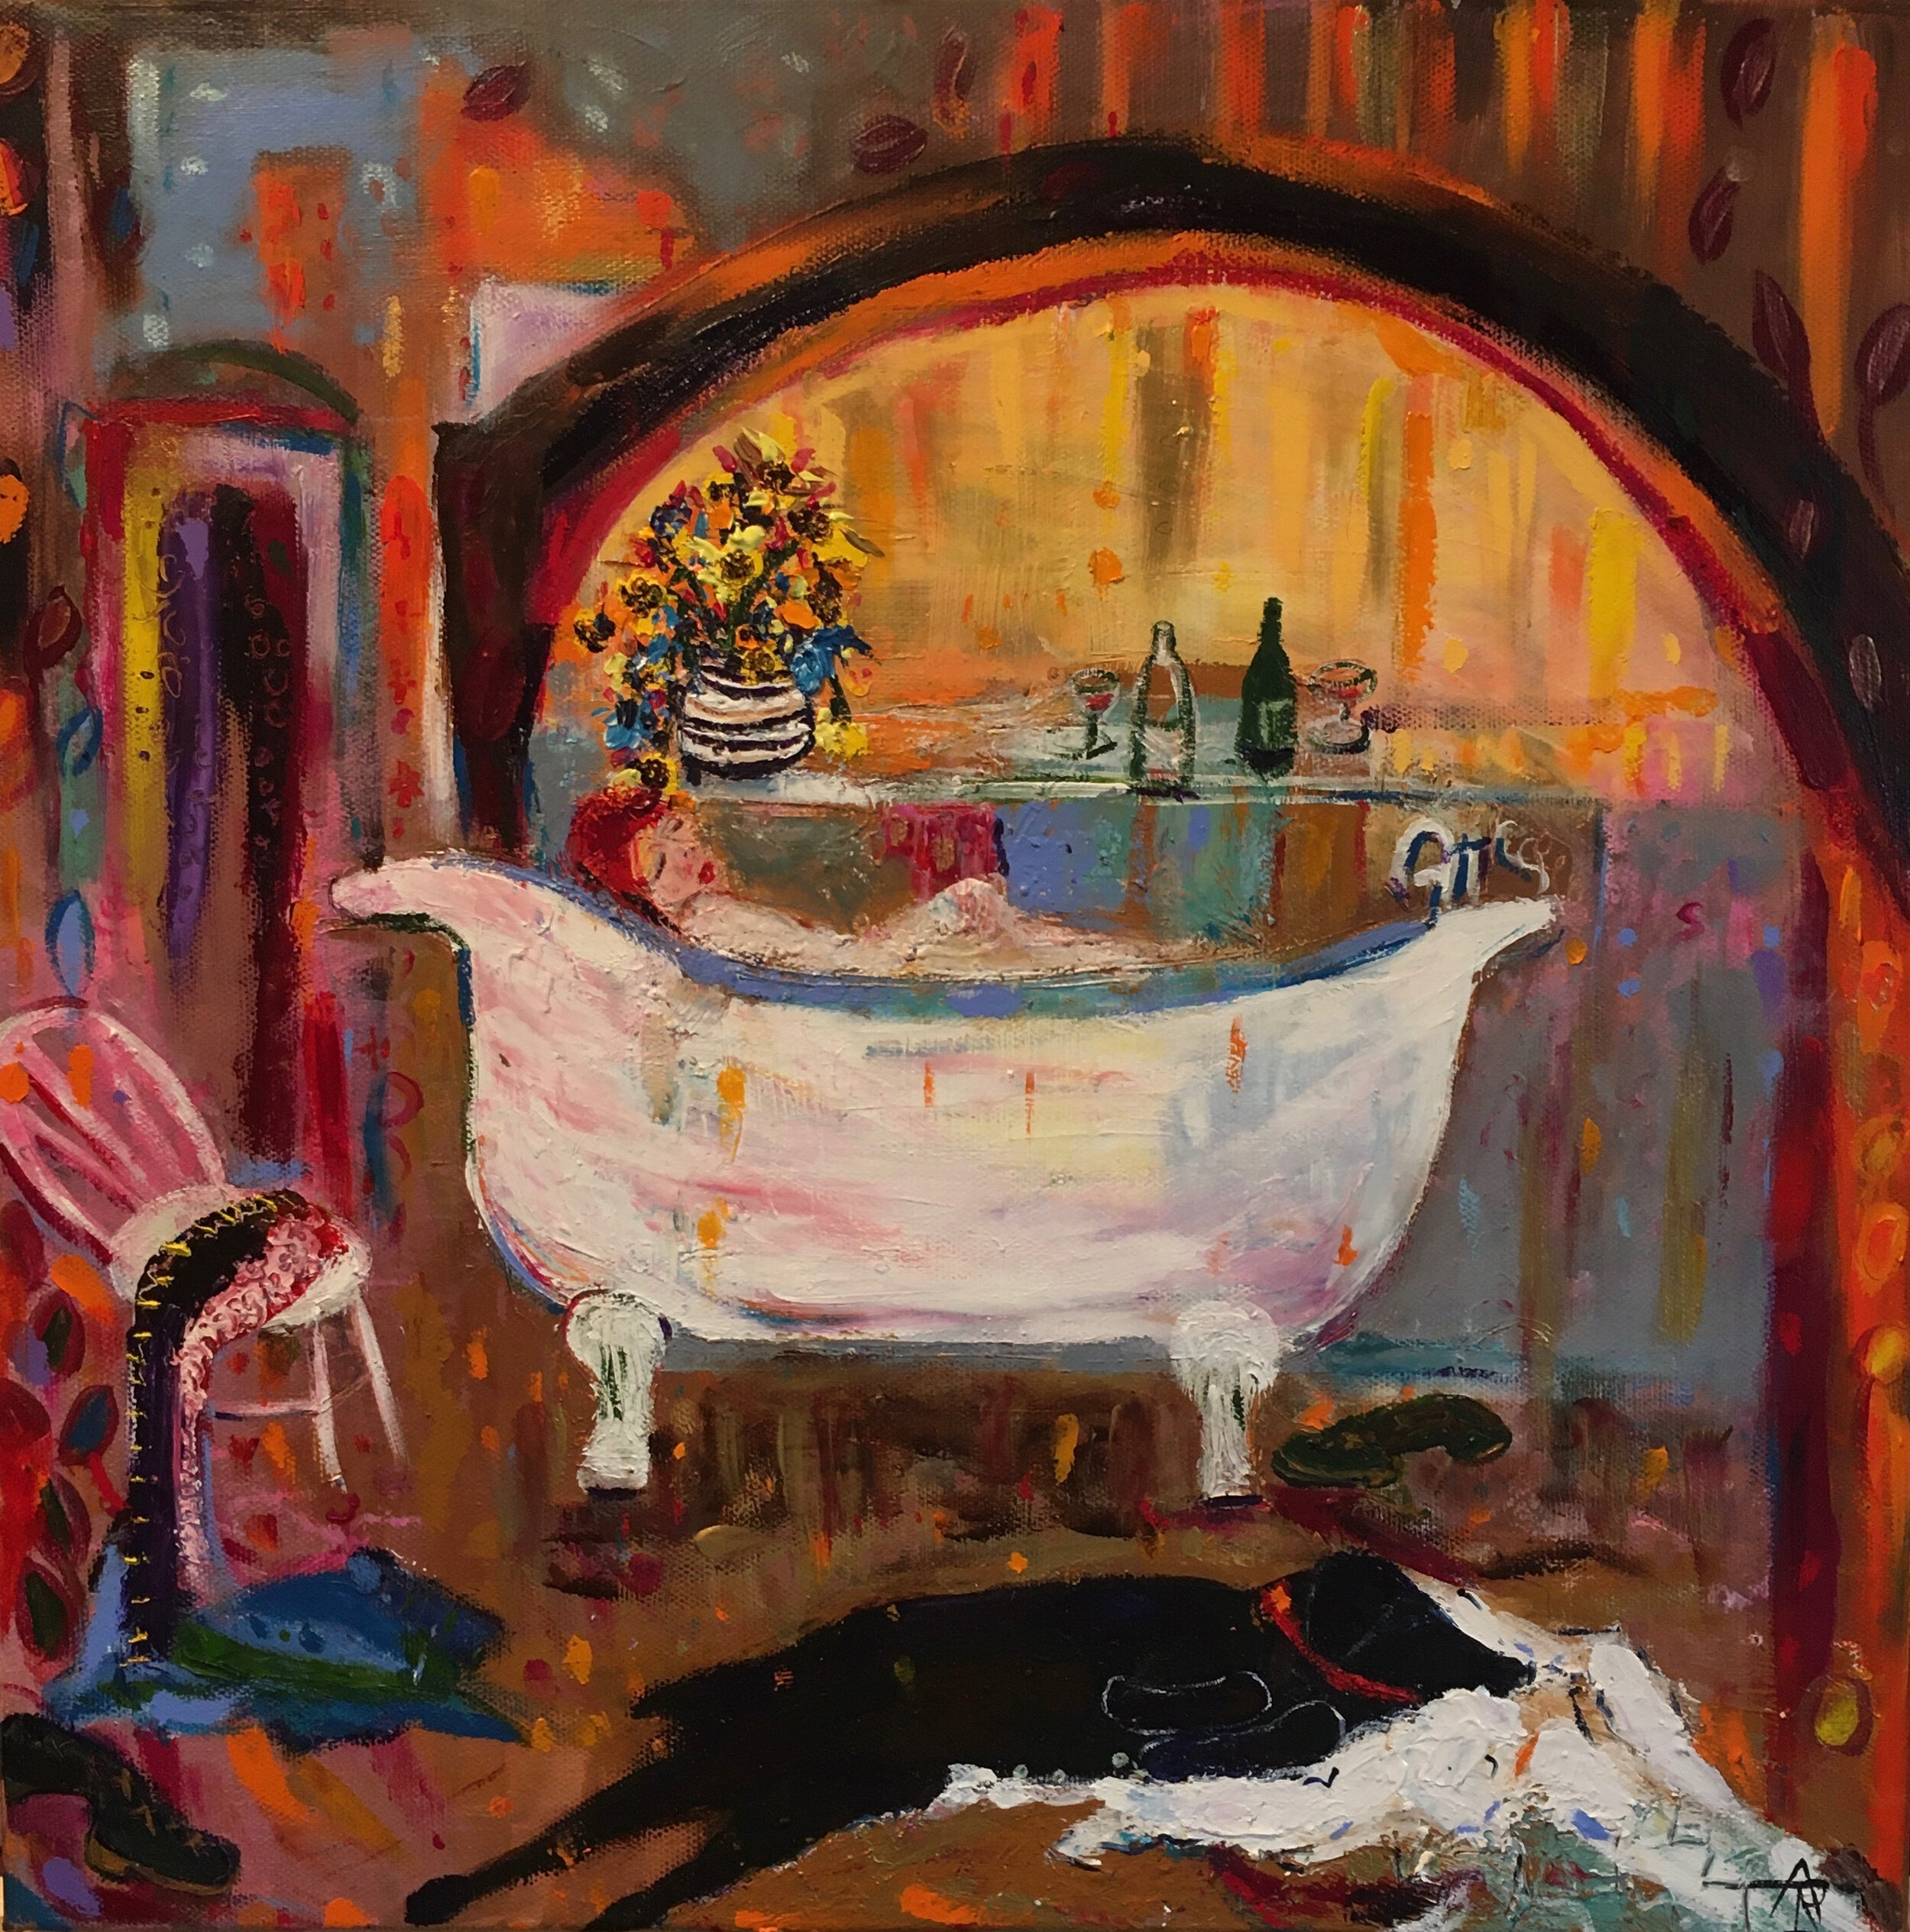 Escape To The Bath, mixed on canvas, 46 x 46 cm, £450